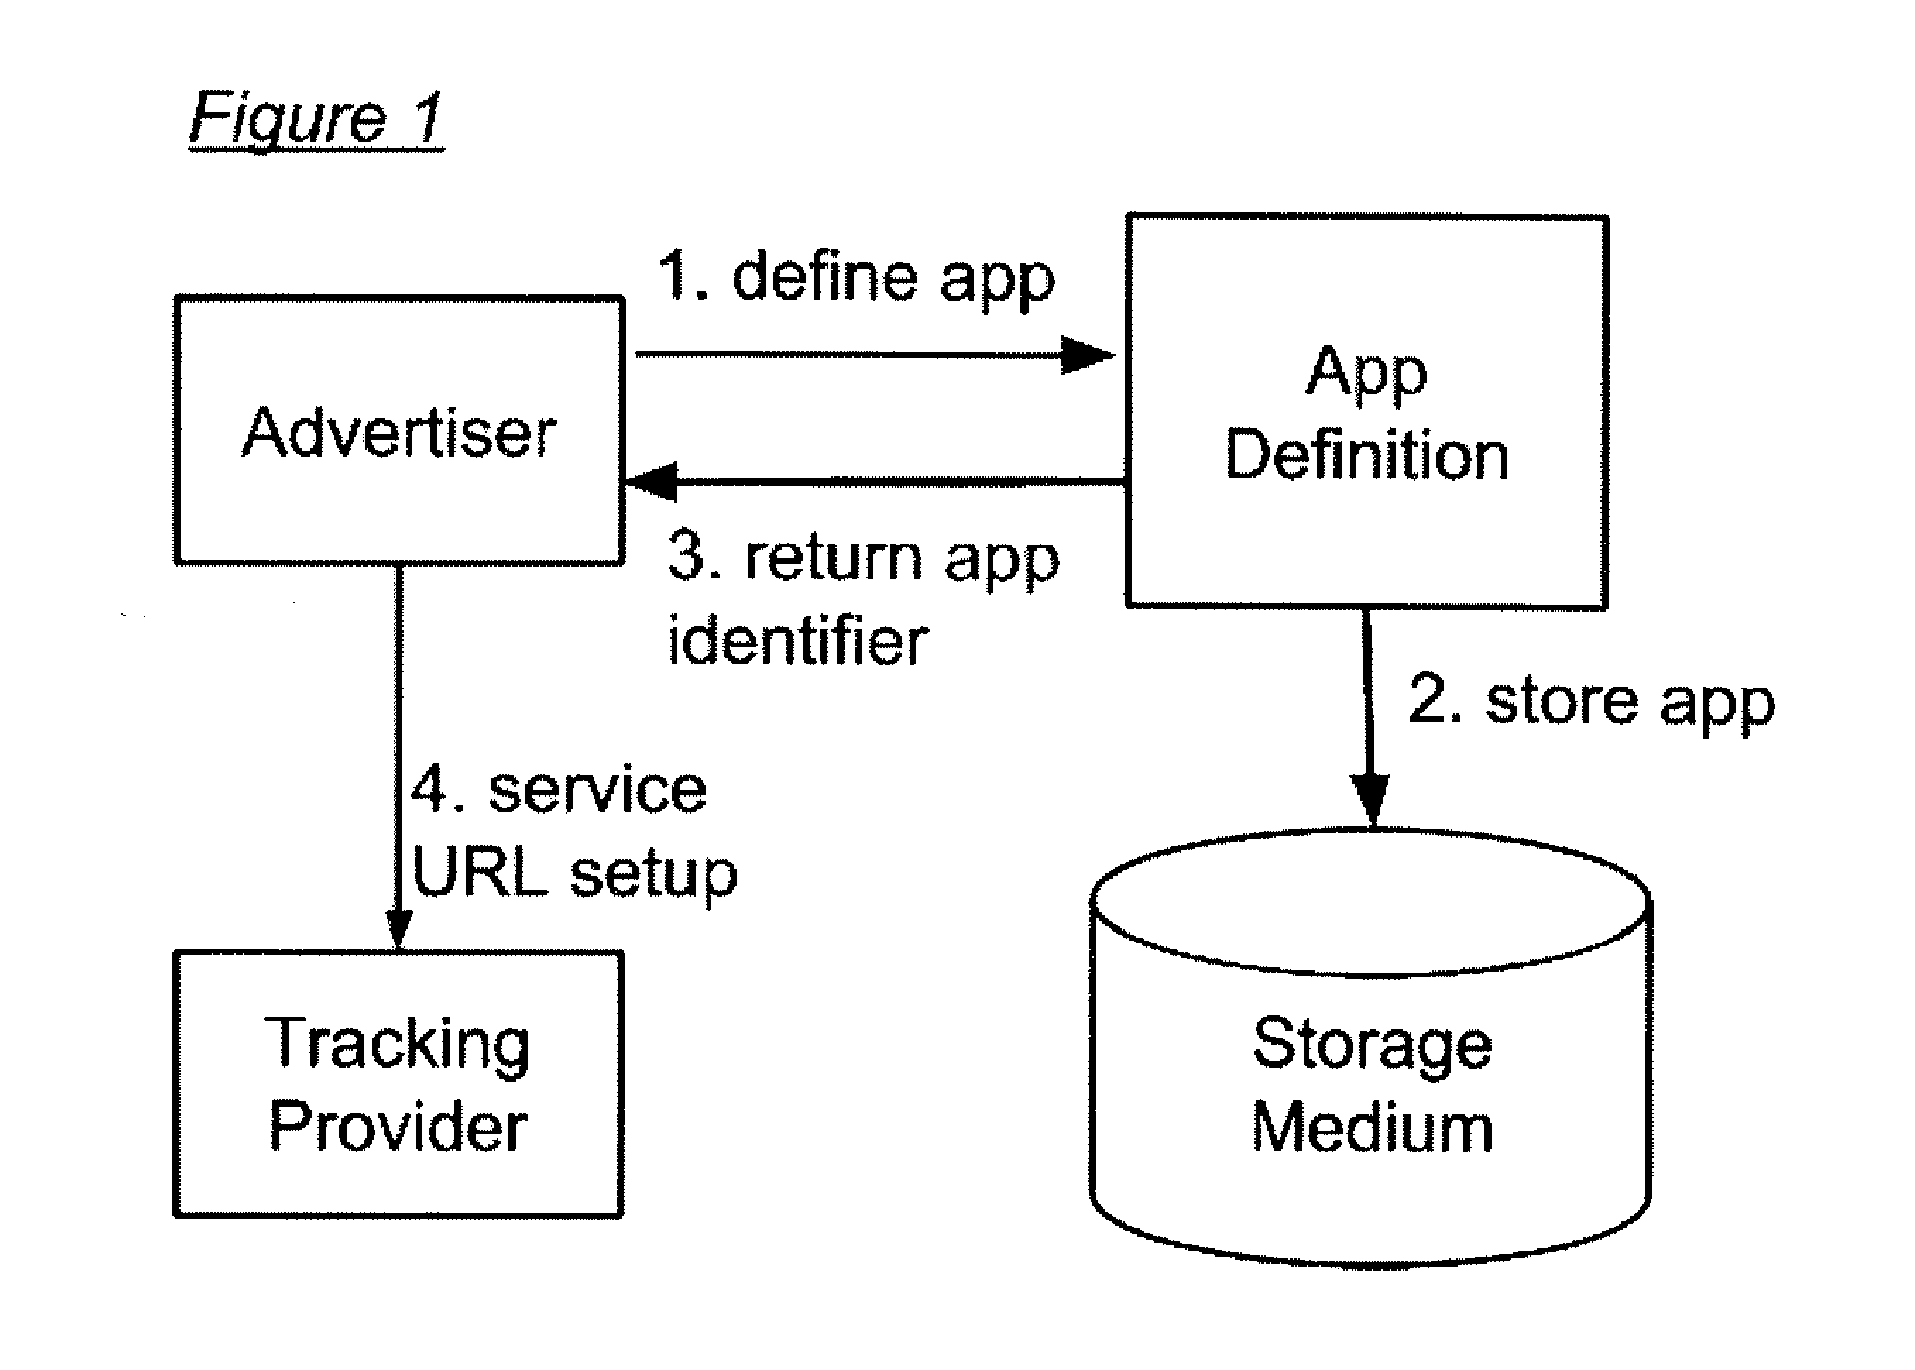 Tracker-mediated mobile in-app contentredemption system for app advertisers over the internet